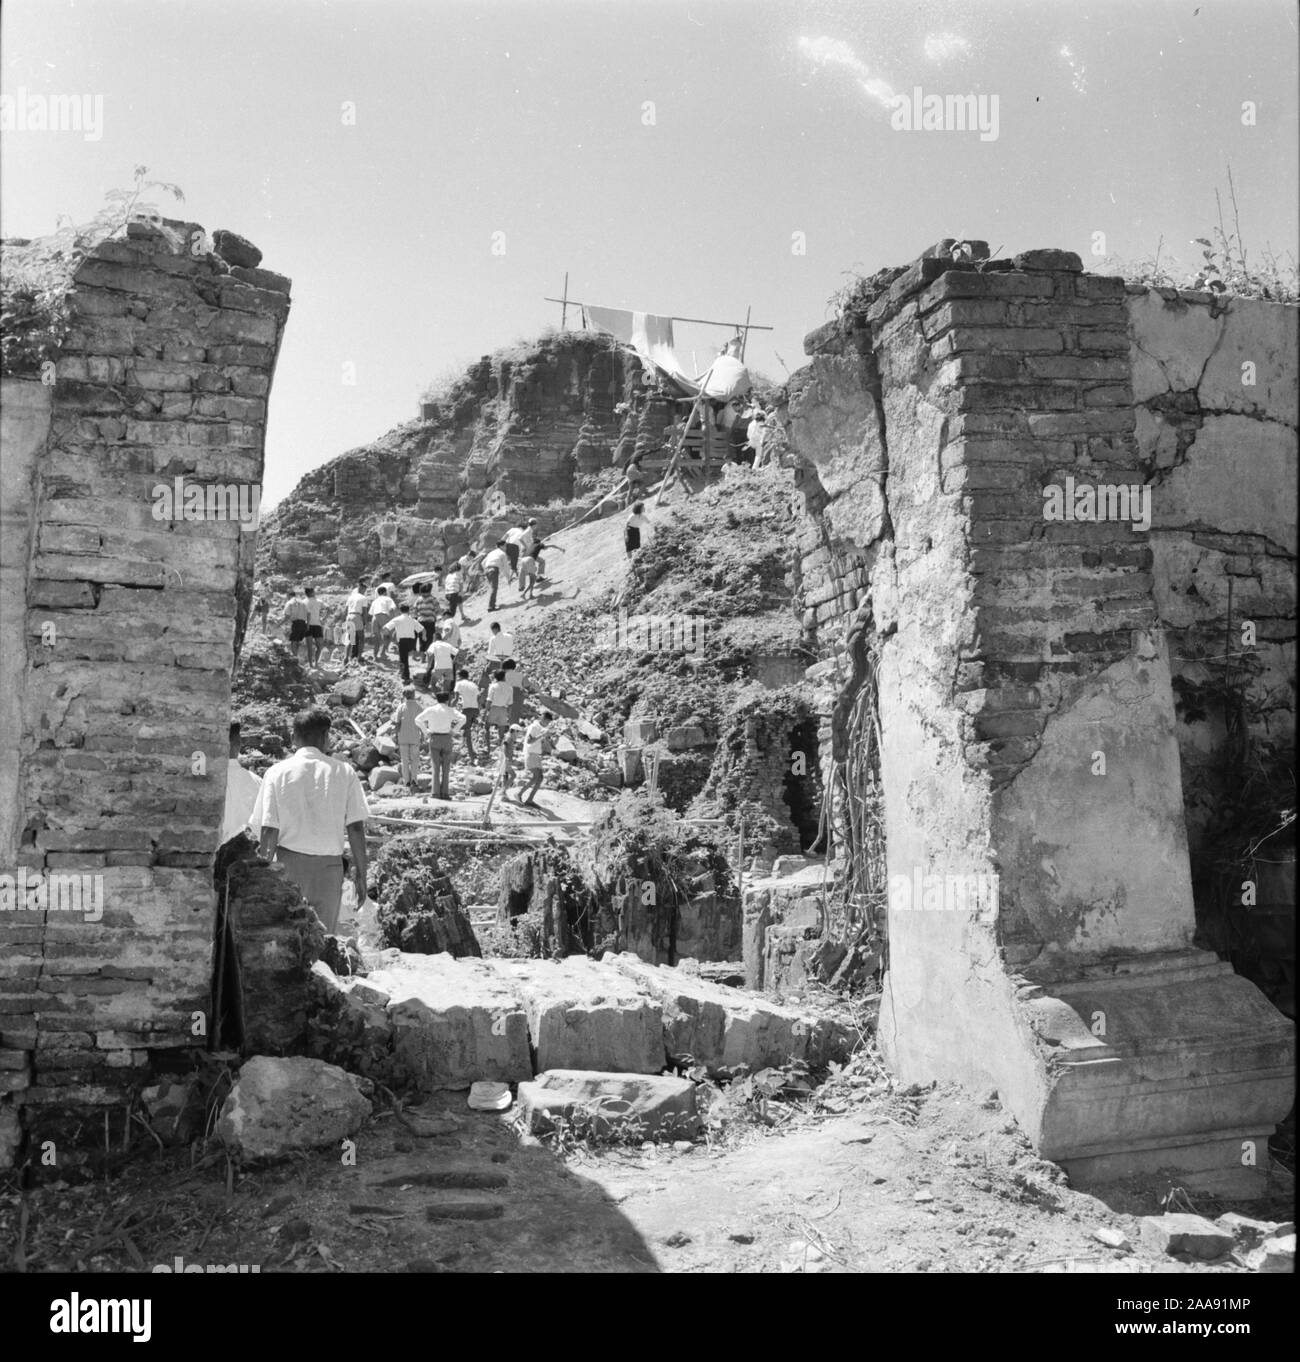 Ayutthaya Historical Park while being restored by the Leader with donation from PM Unu of Burma as shown in this set of photographs taken on 7Oct 1956 Stock Photo